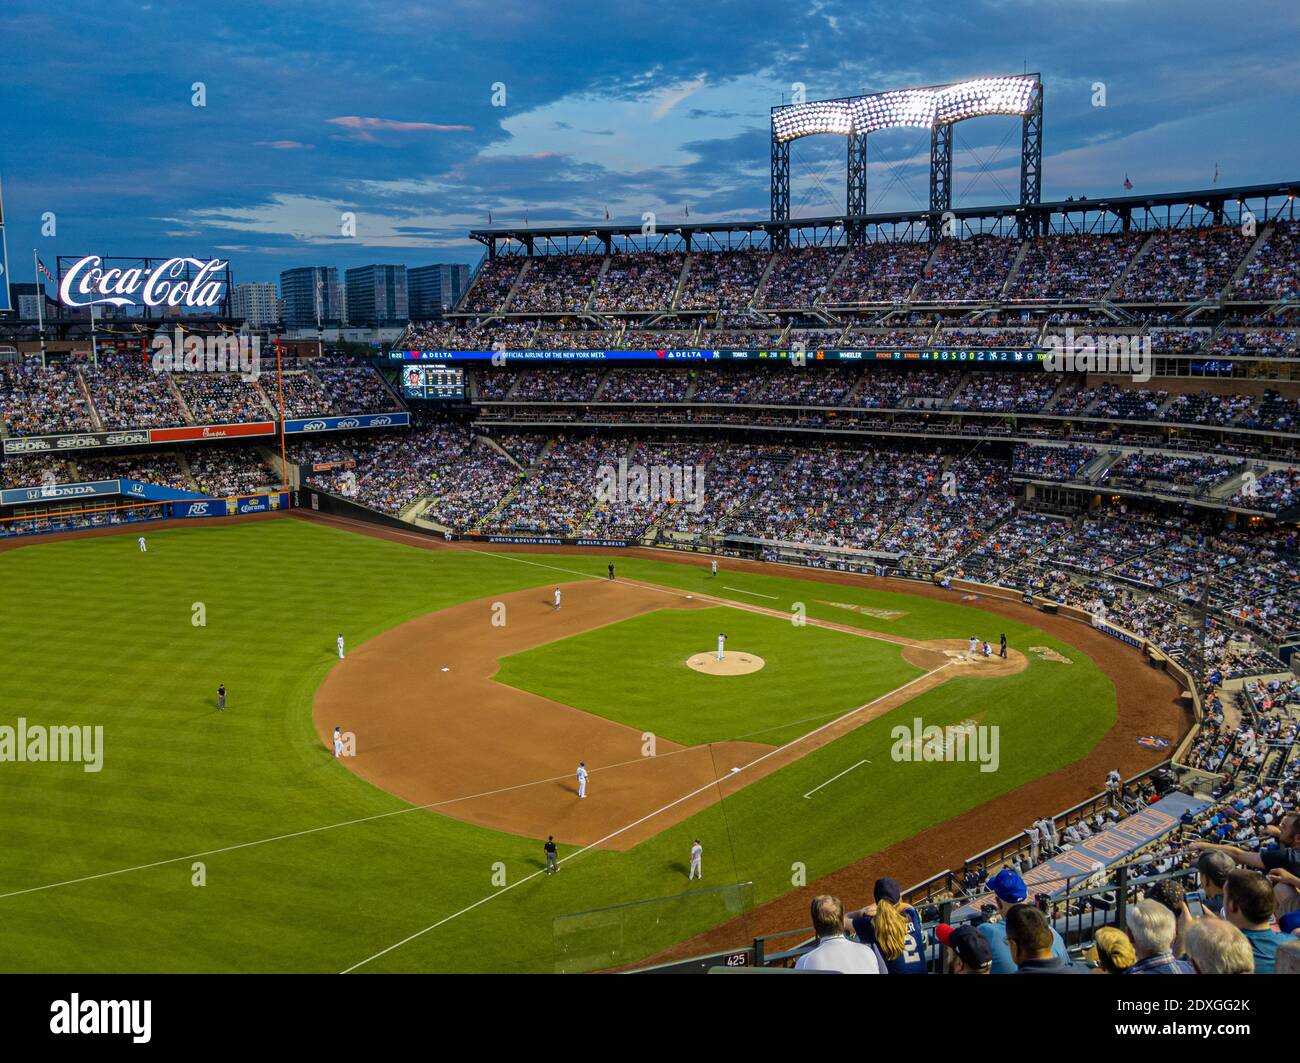 New york mets Stock Photos, Royalty Free New york mets Images